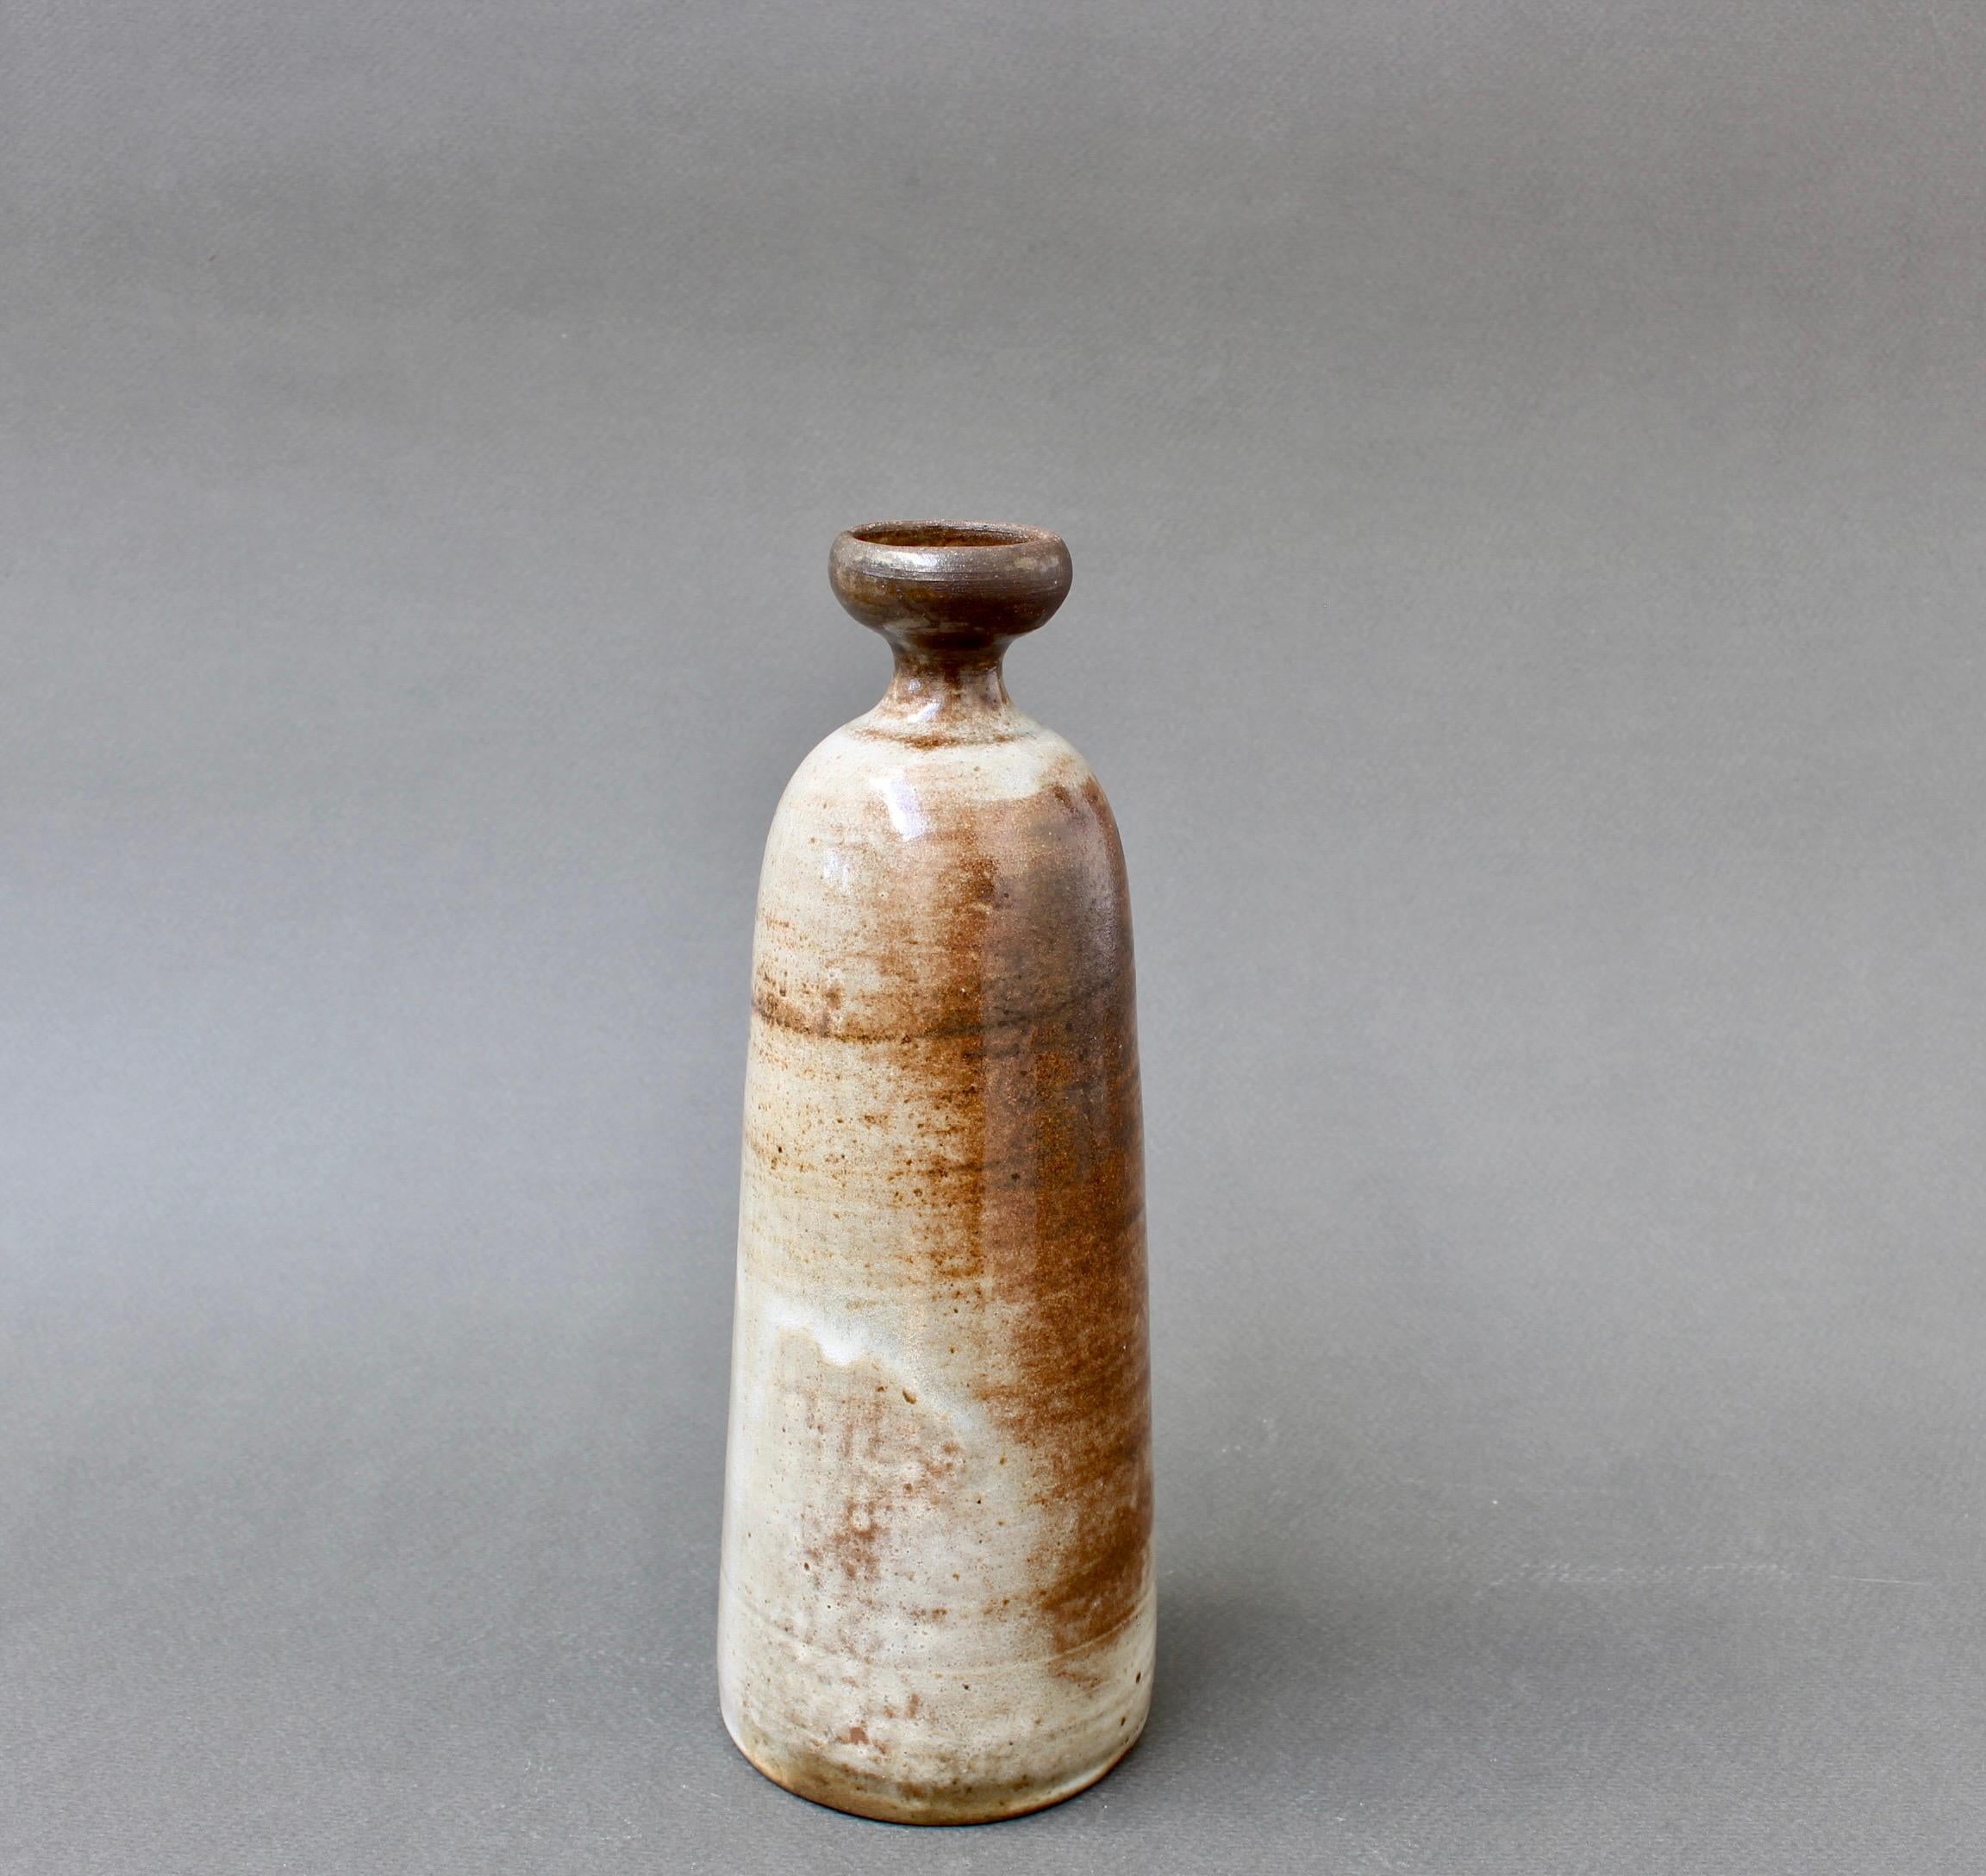 Mid-century ceramic vase by Jacques Pouchain / Atelier Dieulefit (circa 1960s). Classically bottle-shaped vase with elegant mouth in Pouchain's signature cloudy glaze style with earth tone hues. It is elegant with a multi-hued surface in dark brown